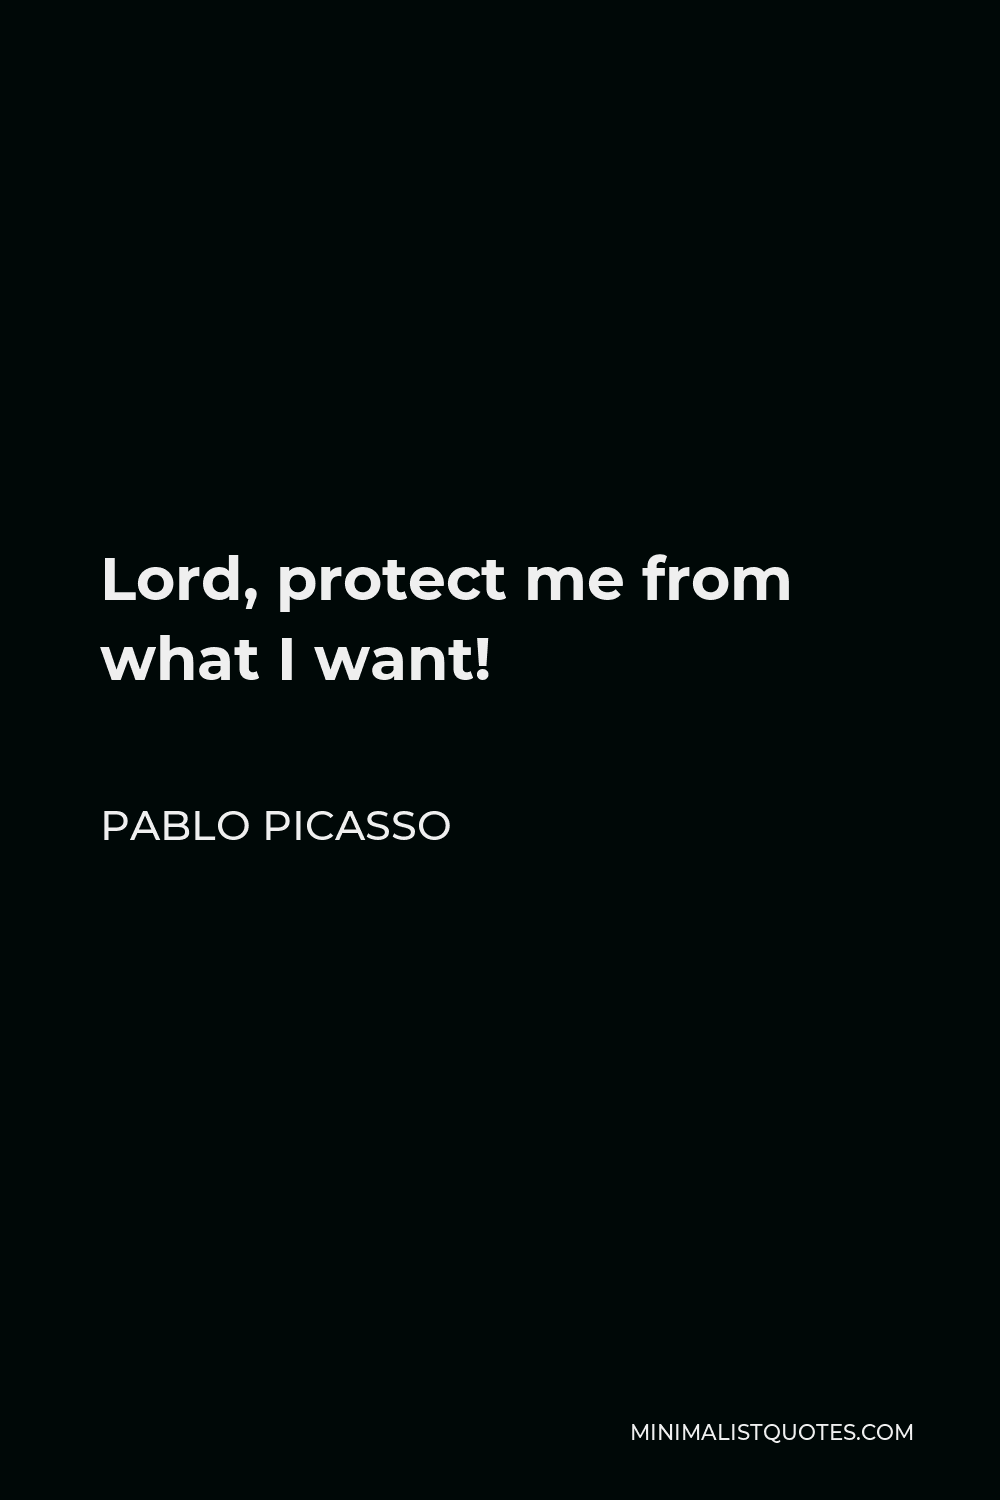 Pablo Picasso Quote - Lord, protect me from what I want!